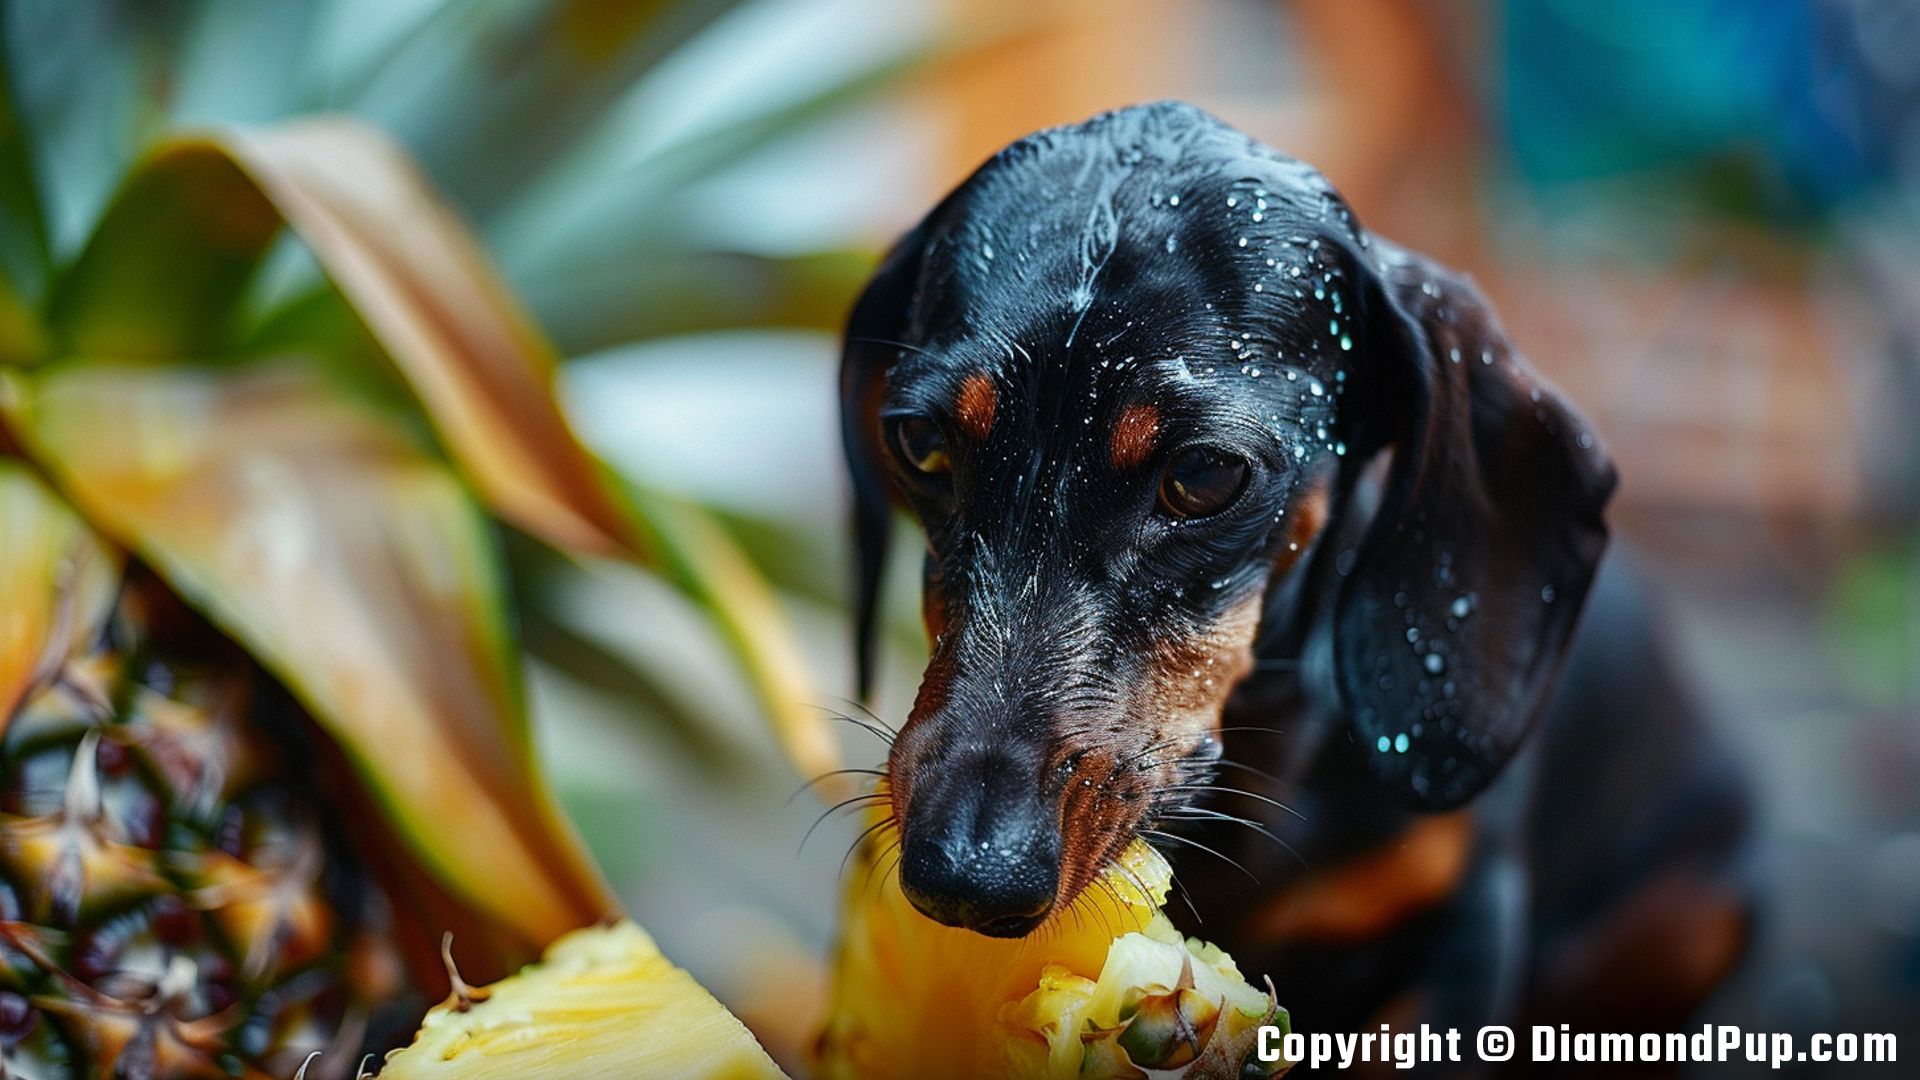 Photograph of a Happy Dachshund Snacking on Pineapple